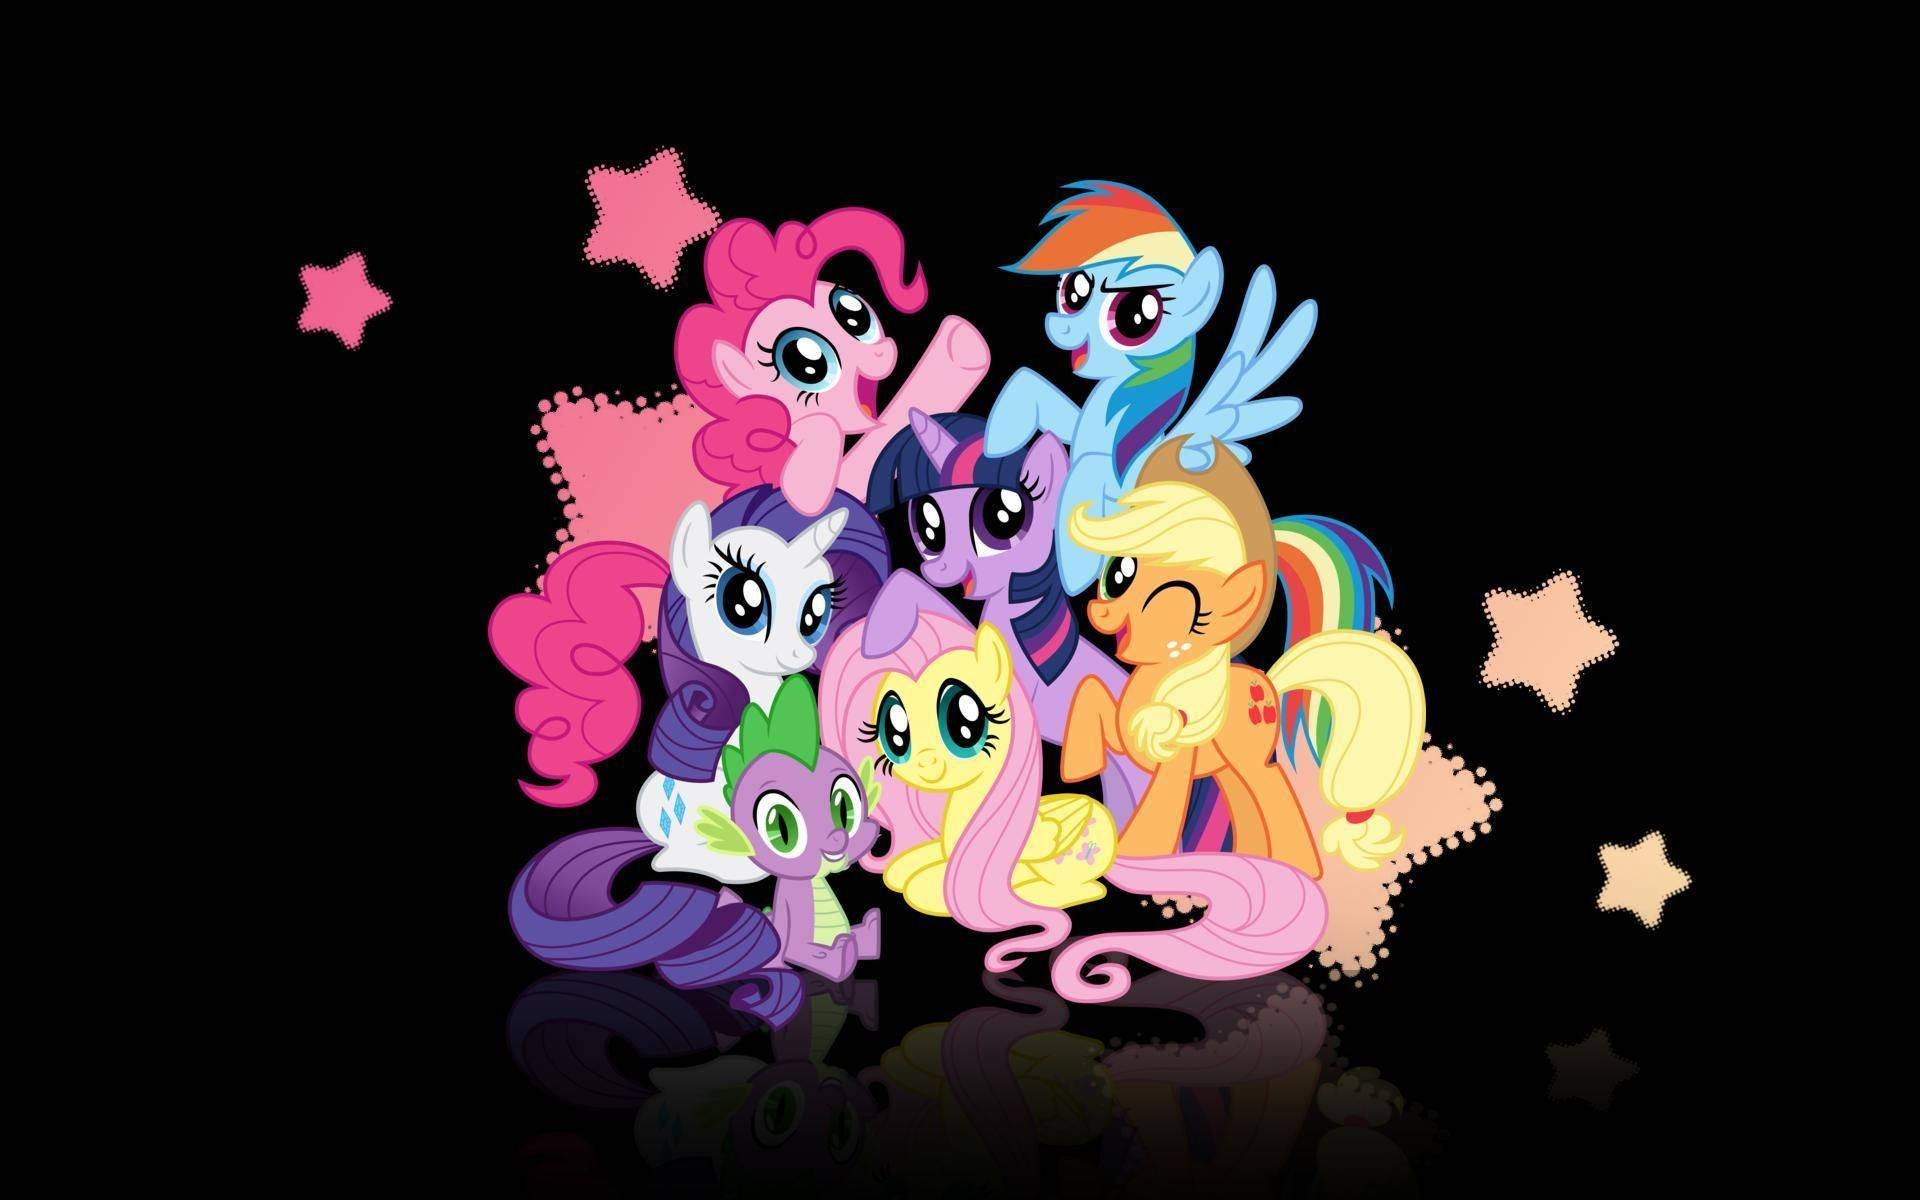 The Cutest My Little Pony Desktop For Your Home Background